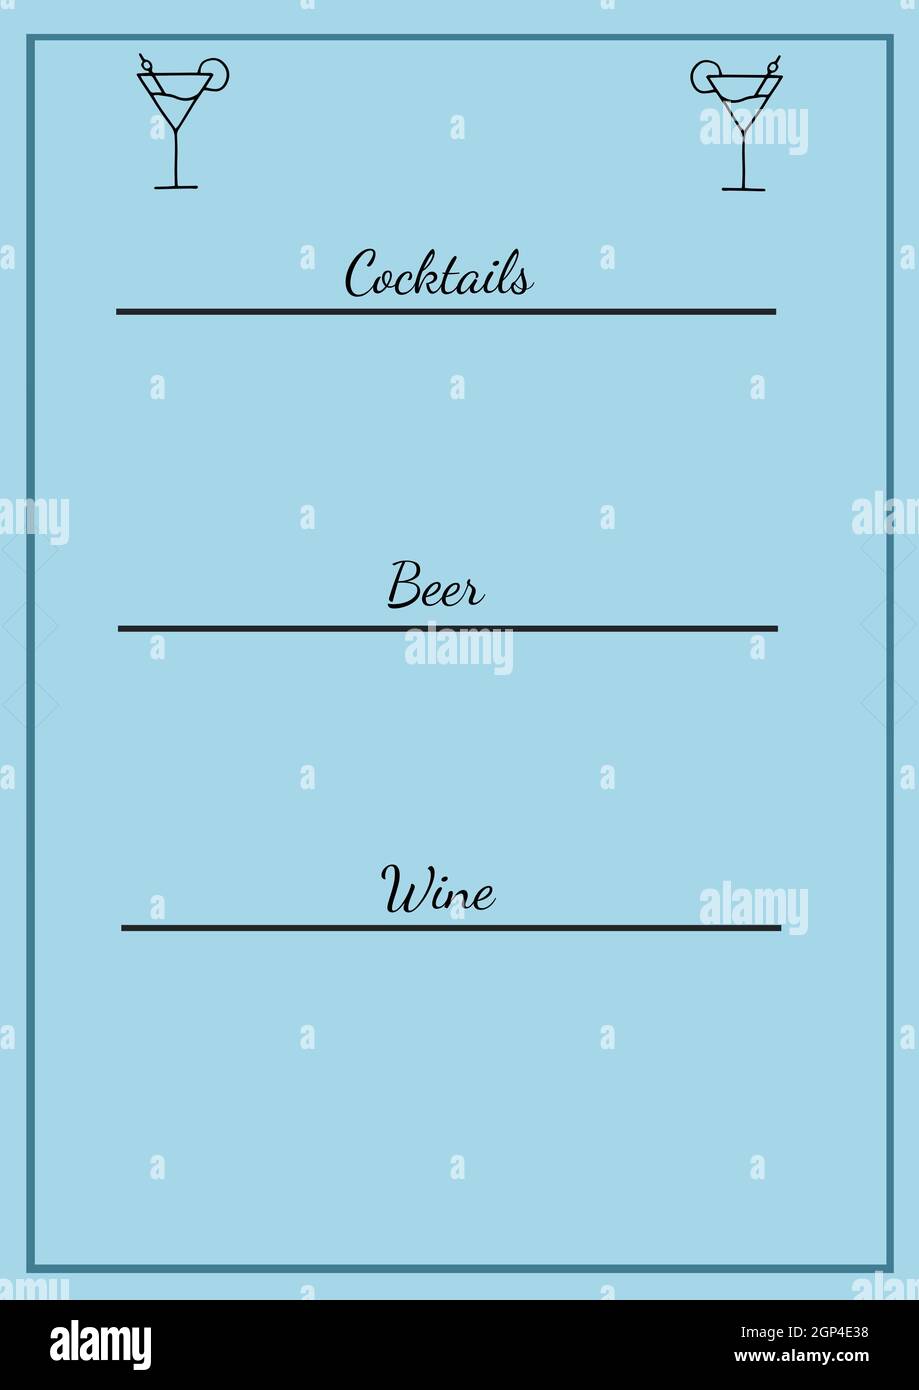 Composition of cocktails beer wine text on blue background Stock Photo